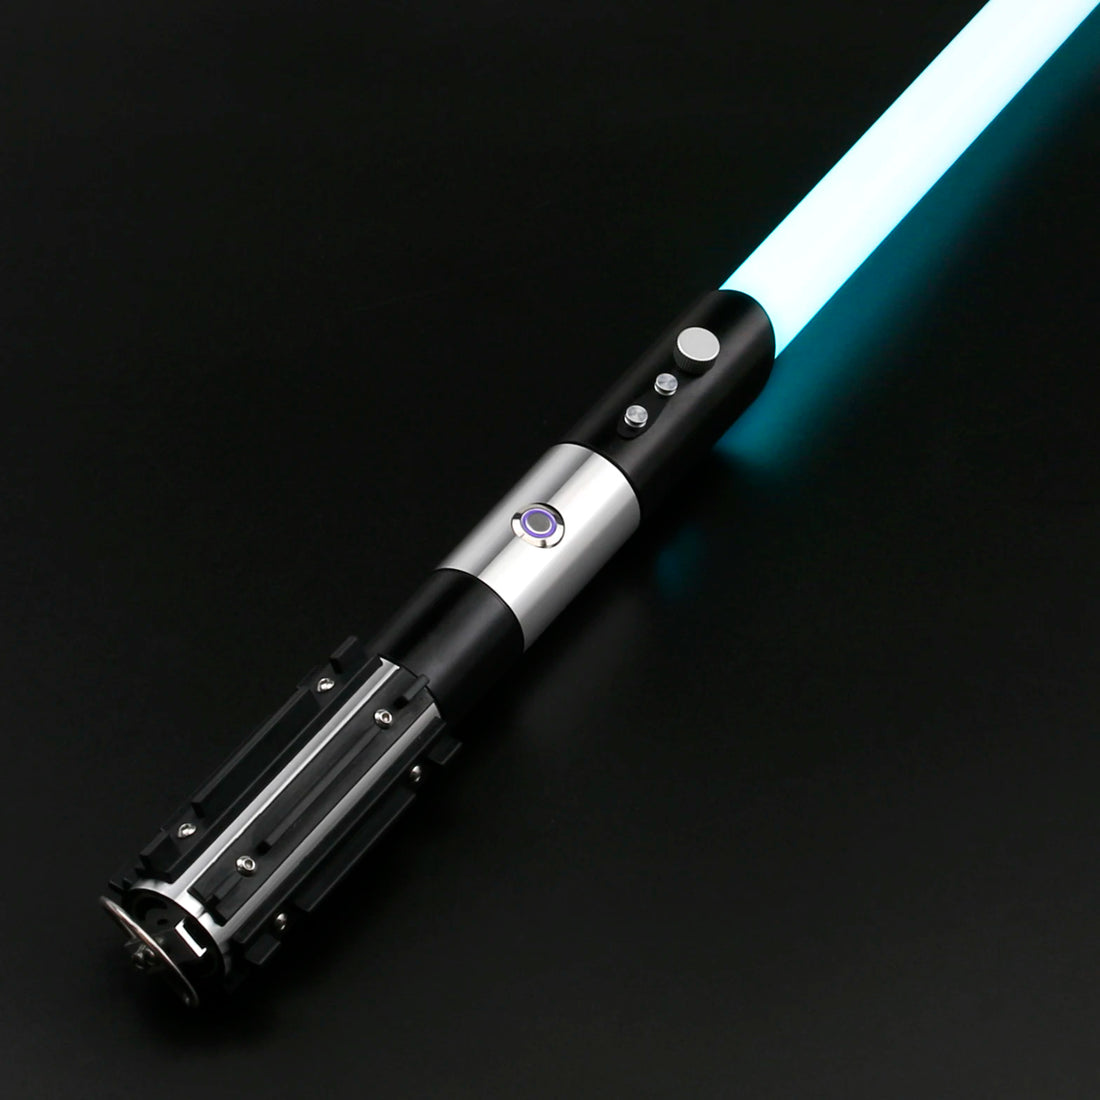 TXQSABER  Darth Vader Lightsaber Neopixel Smooth Swing Heavy Dueling Laser Sword Metal Handle PC Blade Cosplay Toys Gifts